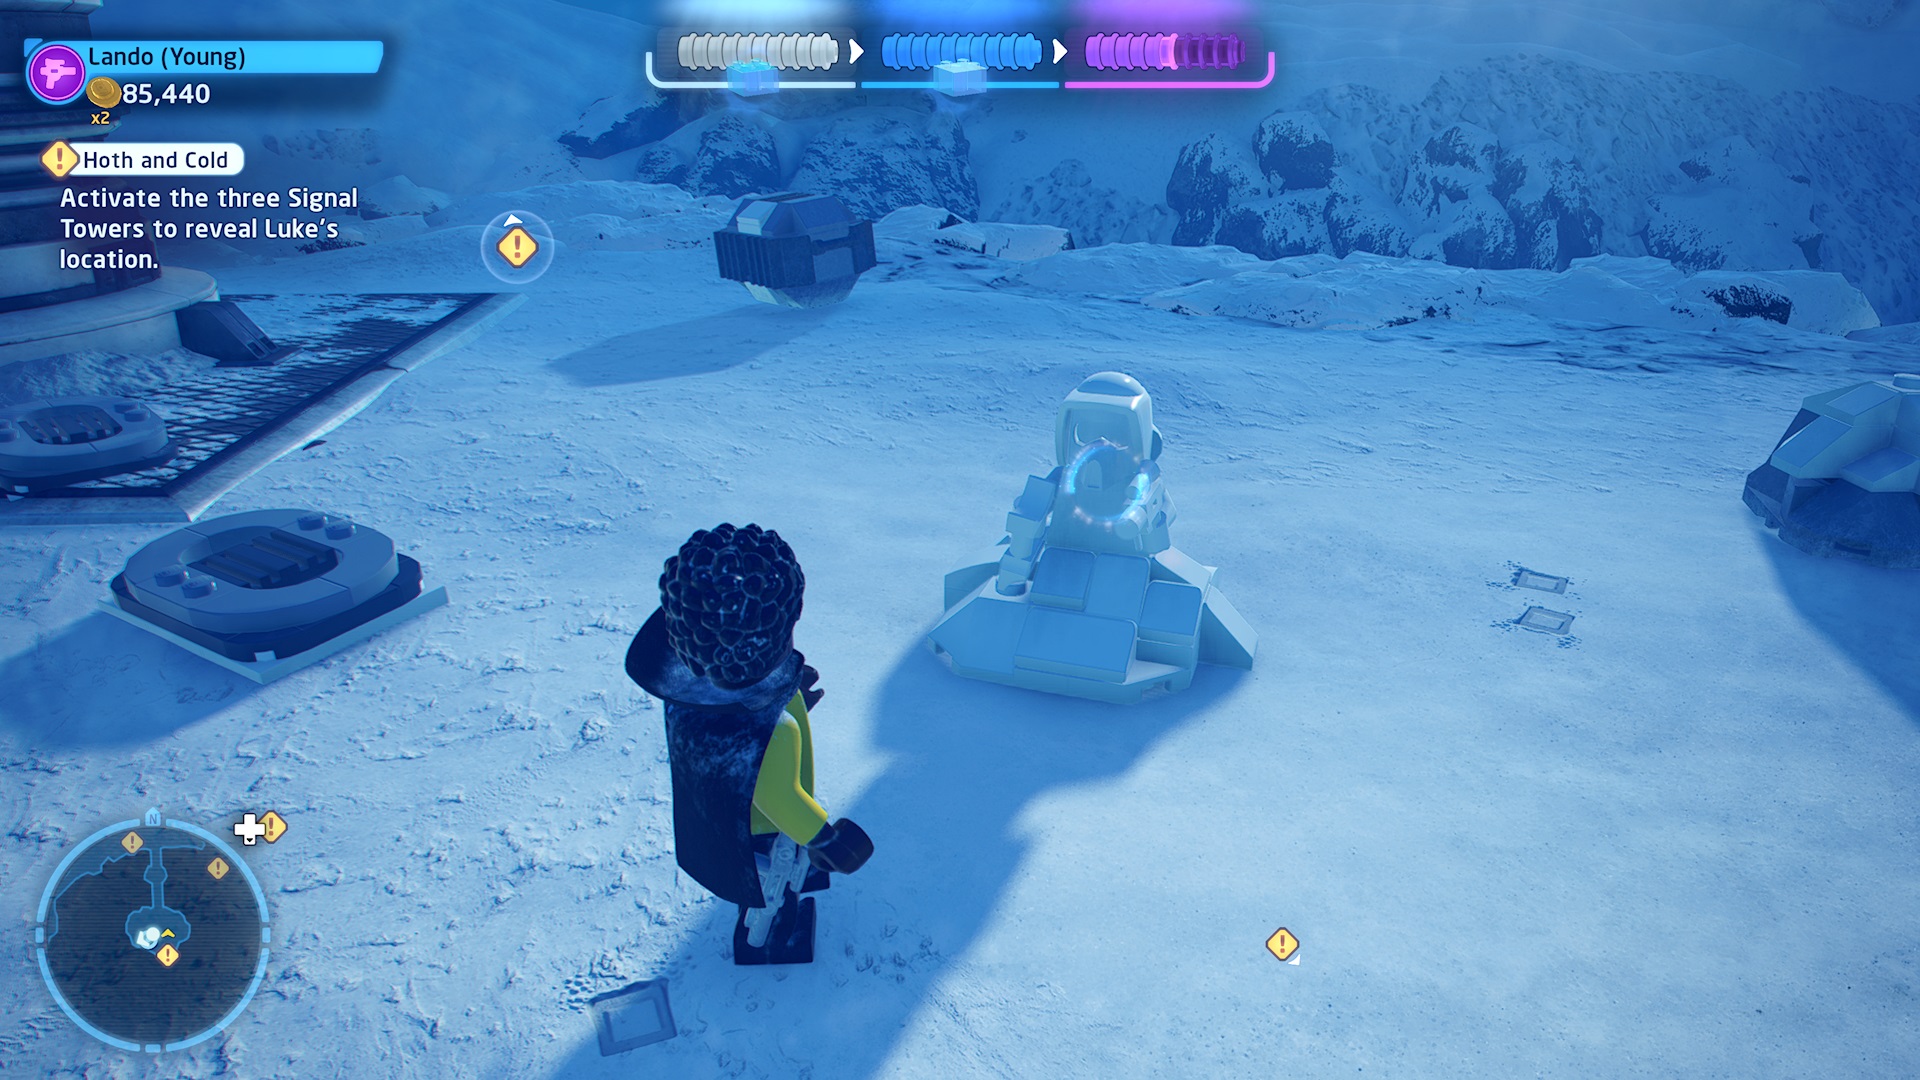 Hoth and Cold snowman 5